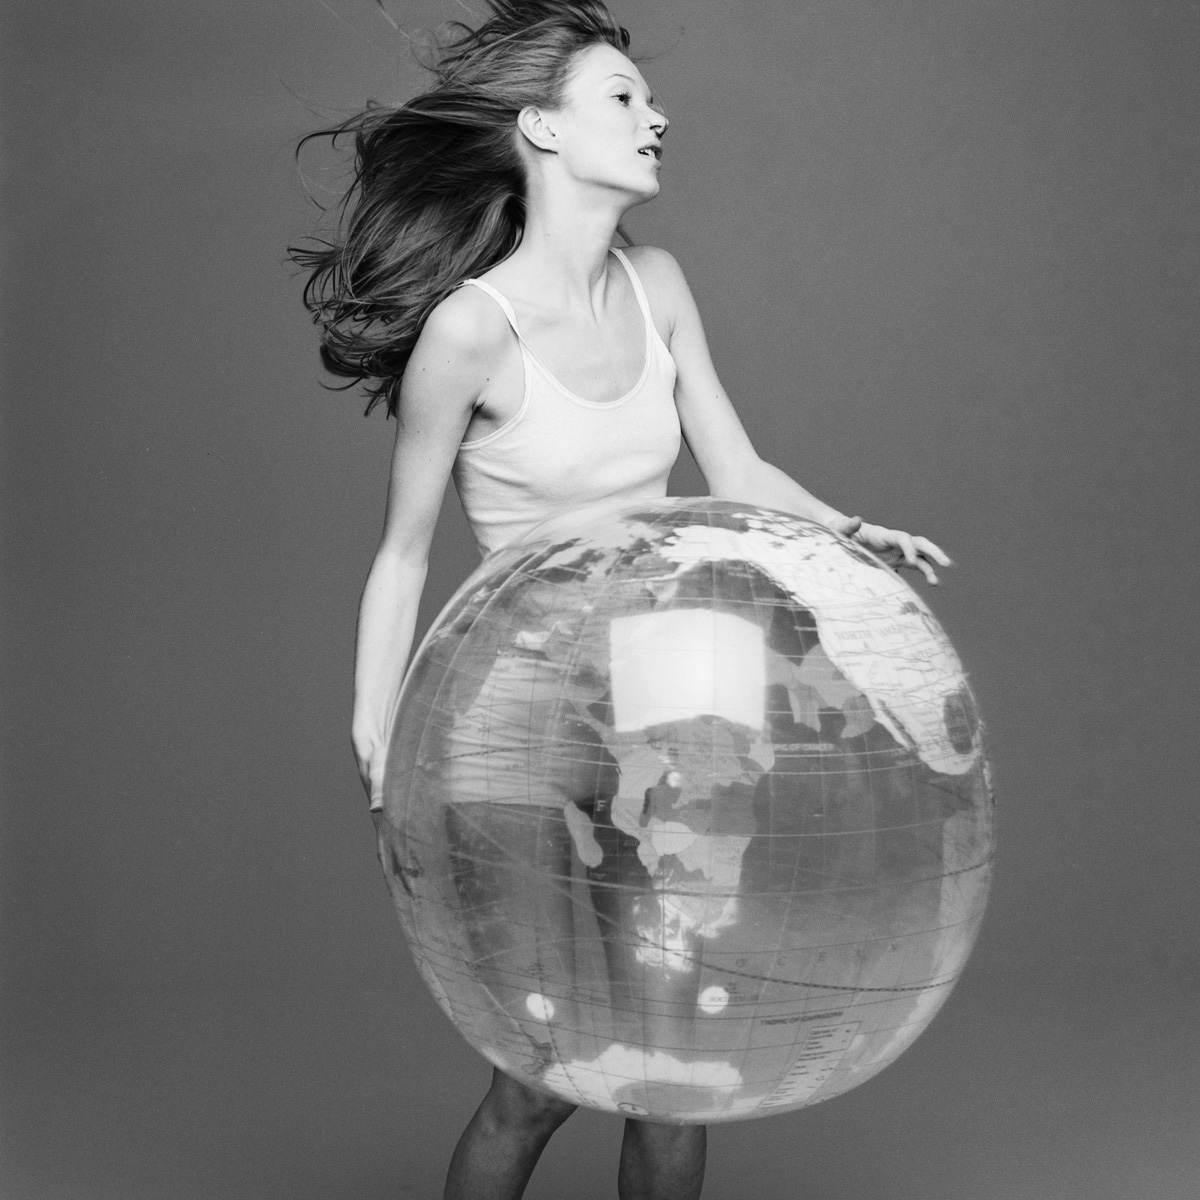 kate+moss+with+the+world+by+patrik+andersson-6.jpeg